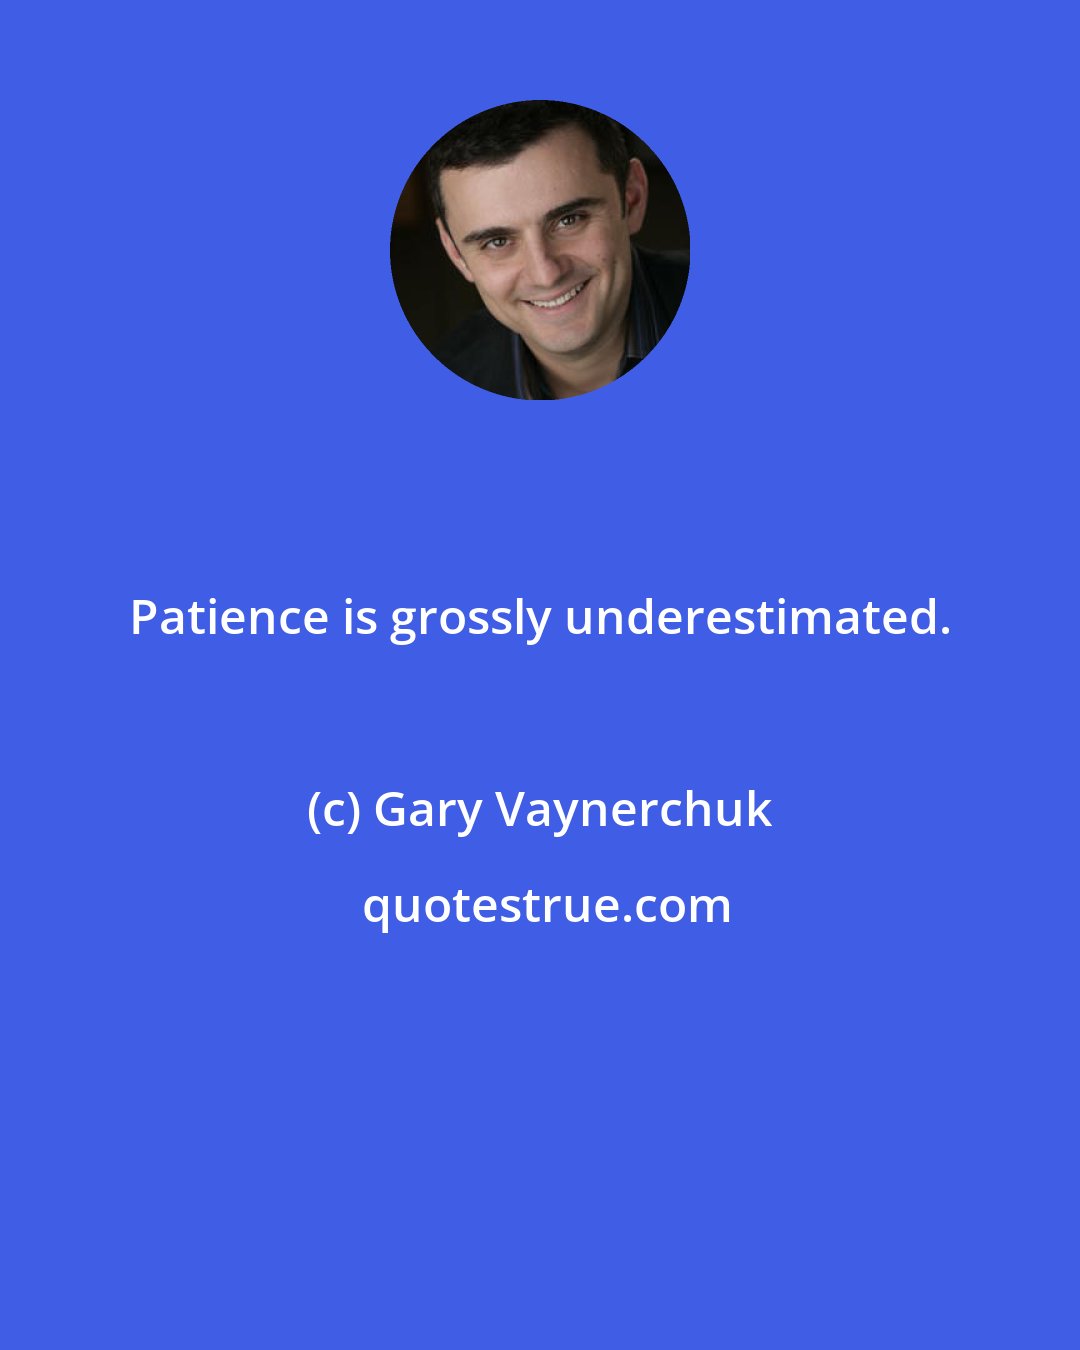 Gary Vaynerchuk: Patience is grossly underestimated.